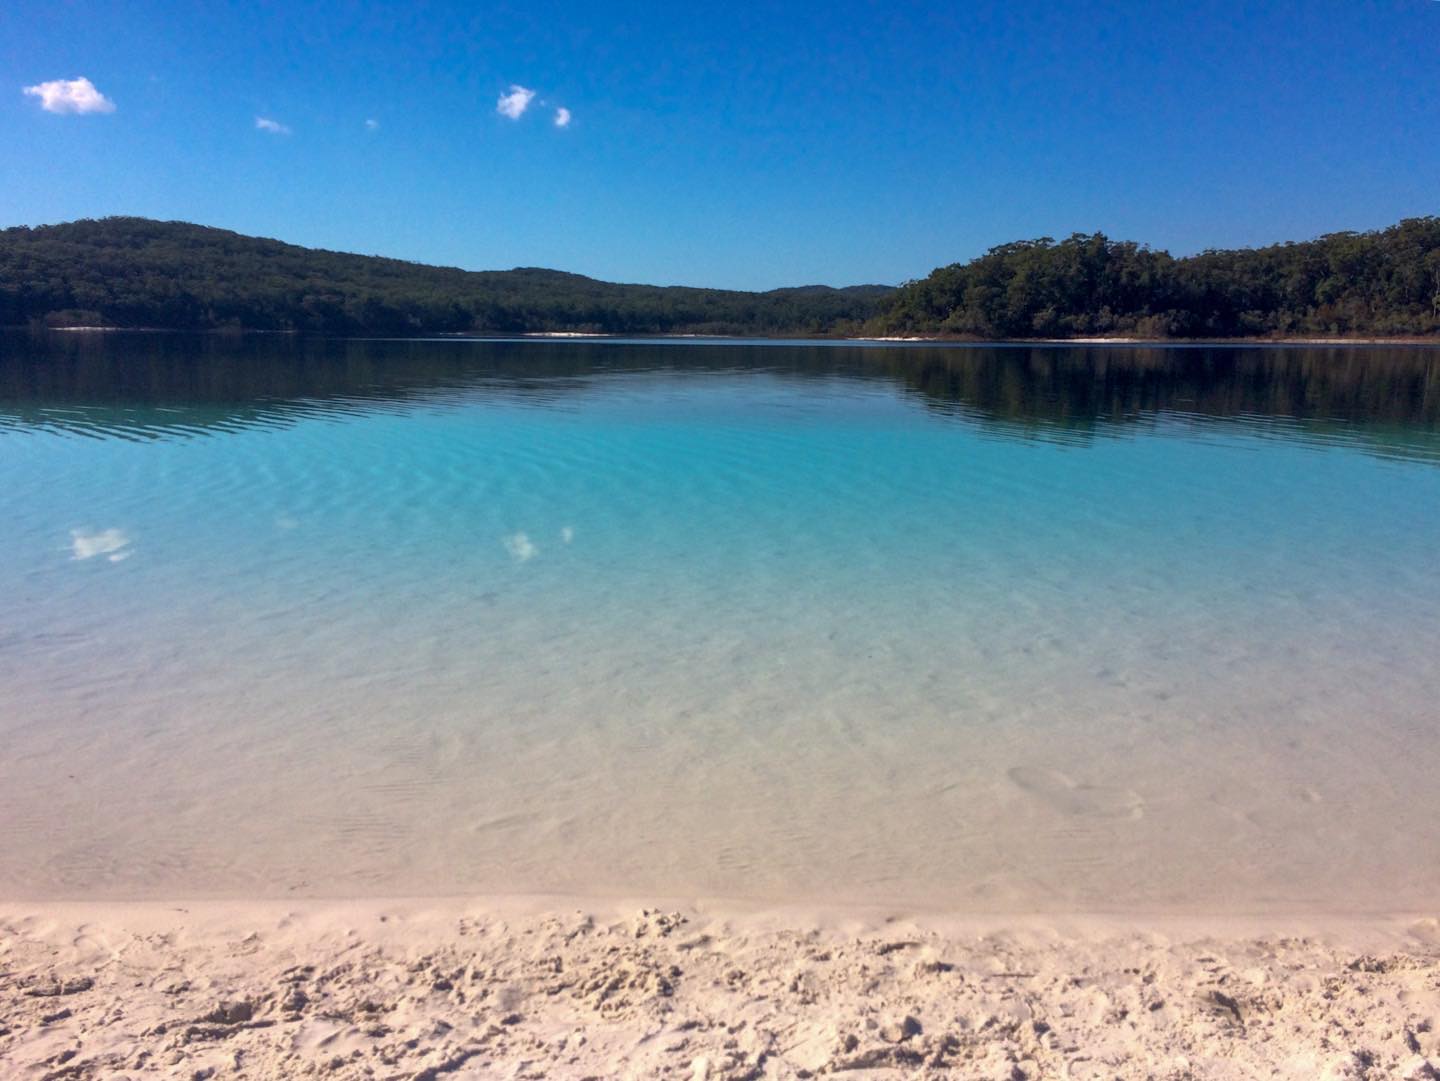 Fraser Island, Australia 🇦🇺.
.
I’ve had a lot of time recently to go through old photos and I’ve found so many from my time in Australia. I forgot how blue the water was at Lake Mackenzie on Fraser Island! But being the middle of winter it was also so cold!
.
#travel #australia #backpacking #fraserisland #traveller #queensland #backpacker #travelling #instatravel #explore #travelgram #australian #qld #kgari #lakemckenziefraserisland #fraserislandtour #traveltheworld #traveladdict #visitaustralia #lake #bluesky #roadtrip #lakemackenziefraserisland #lakemckenzie